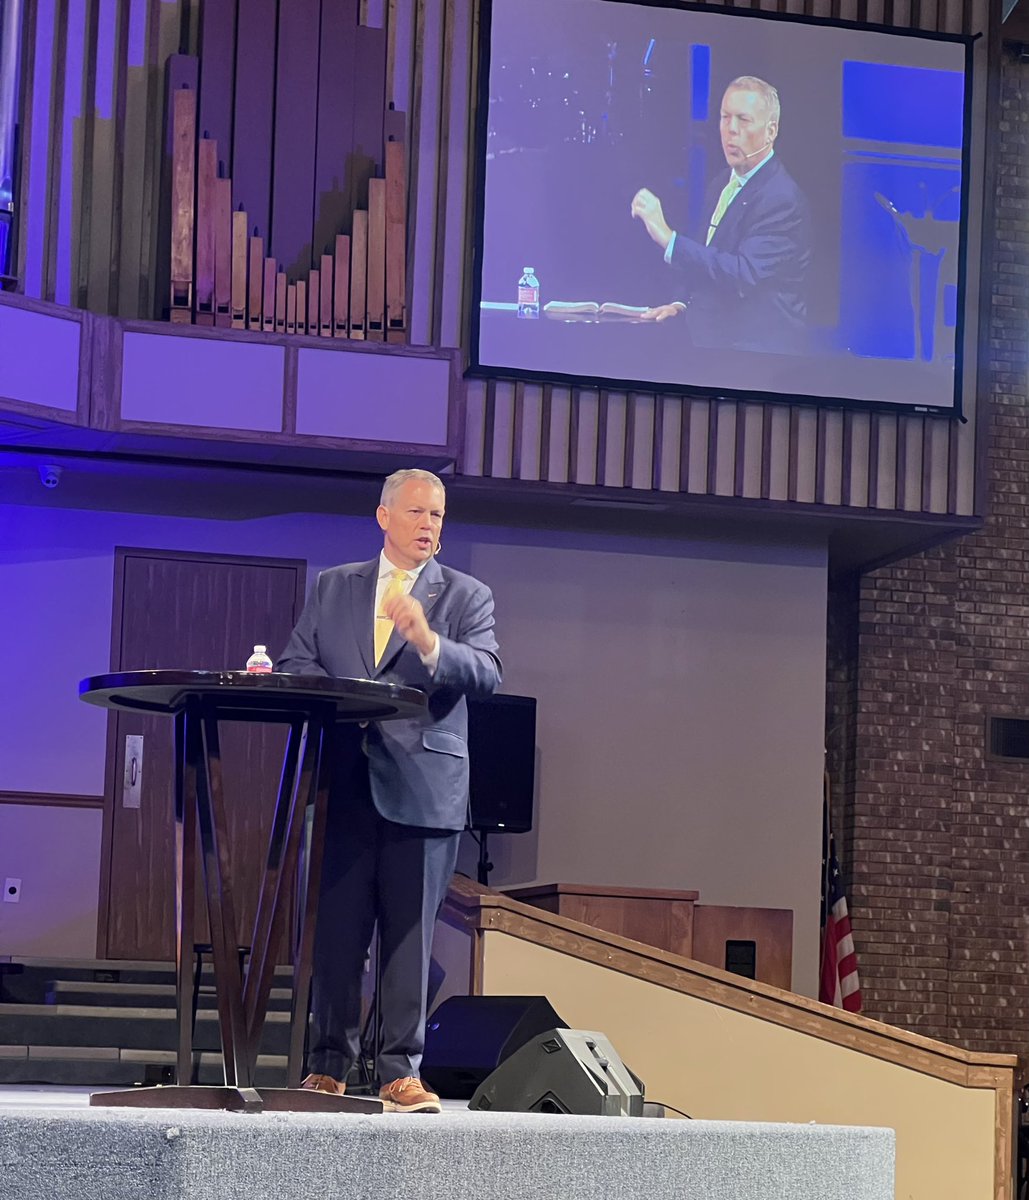 Grateful for the invitation to preach at FBC Stephenville today, and for the opportunity to connect with future HPU Yellow Jackets. Sharing a meal with some of our trustees after church was the perfect end to a great morning.